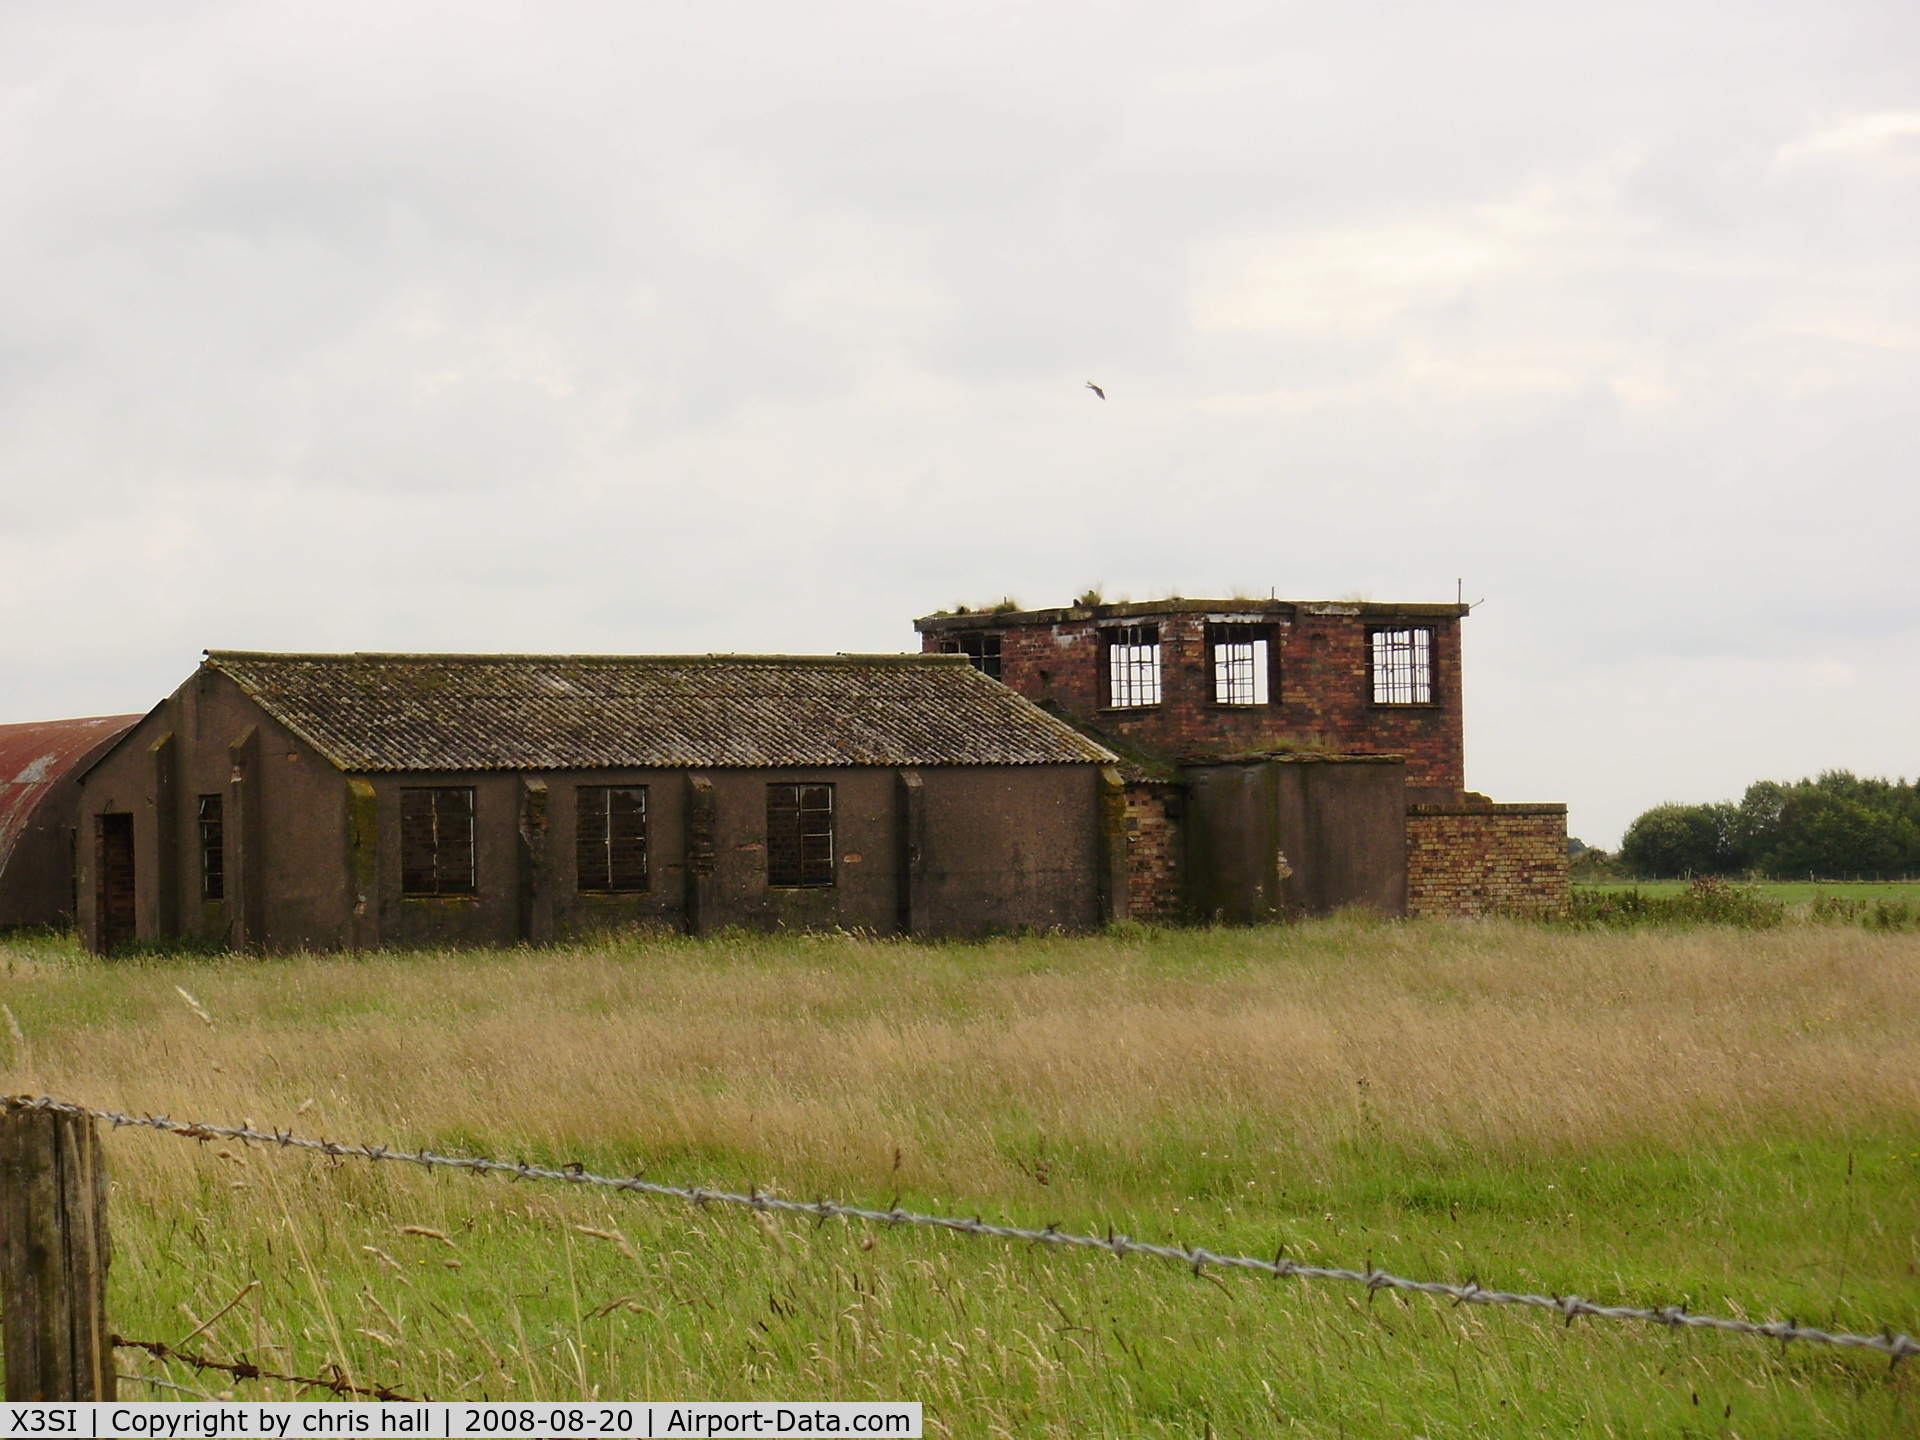 X3SI Airport - The old WWII tower at Seighford Airfield